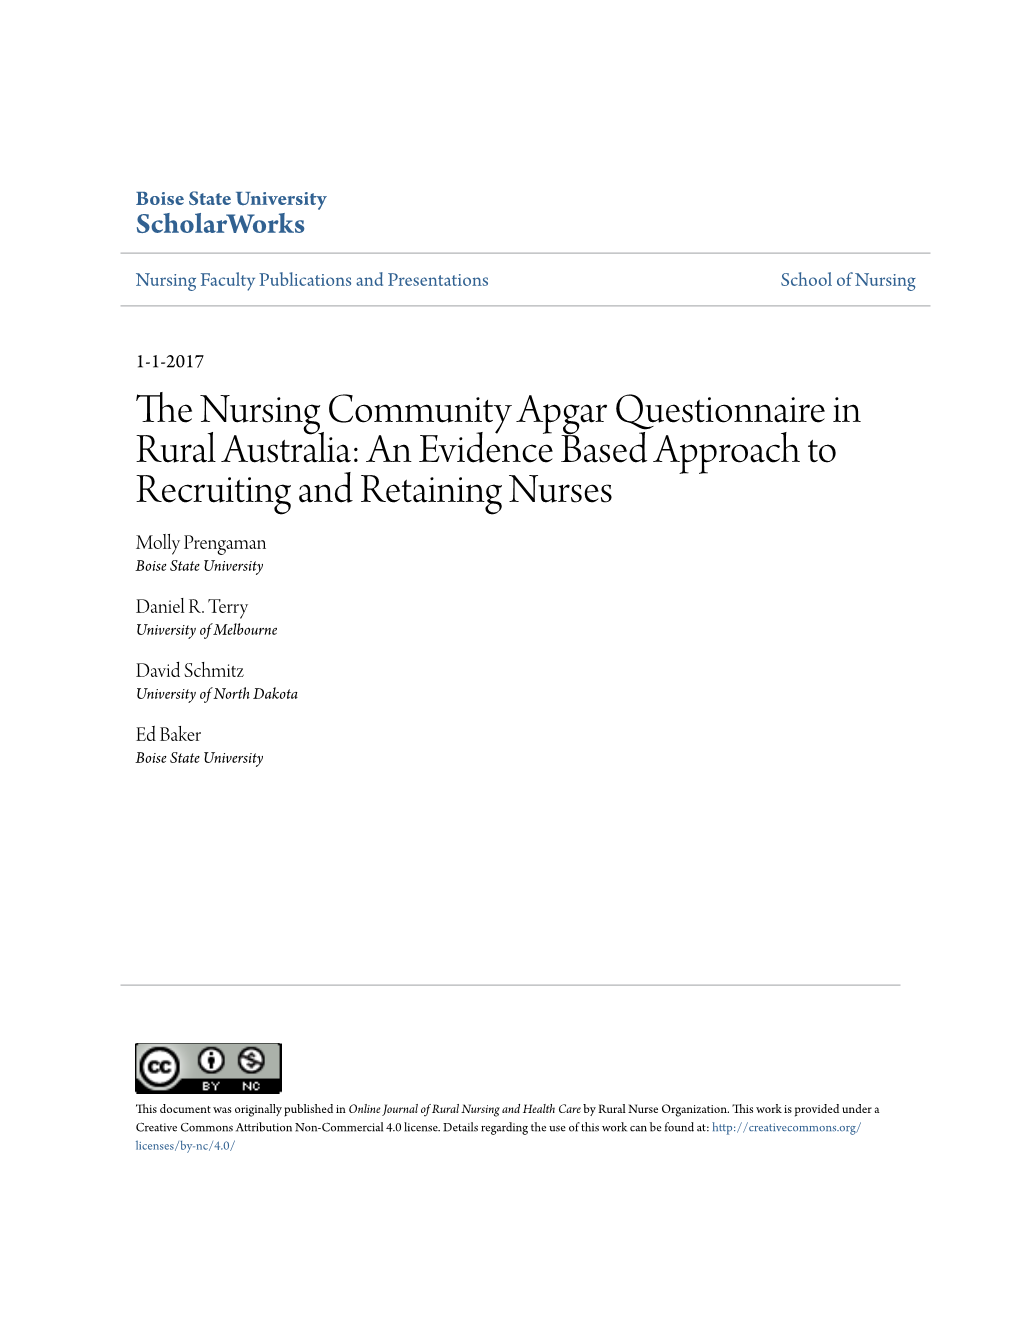 The Nursing Community Apgar Questionnaire in Rural Australia: an Evidence Based Approach to Recruiting and Retaining Nurses